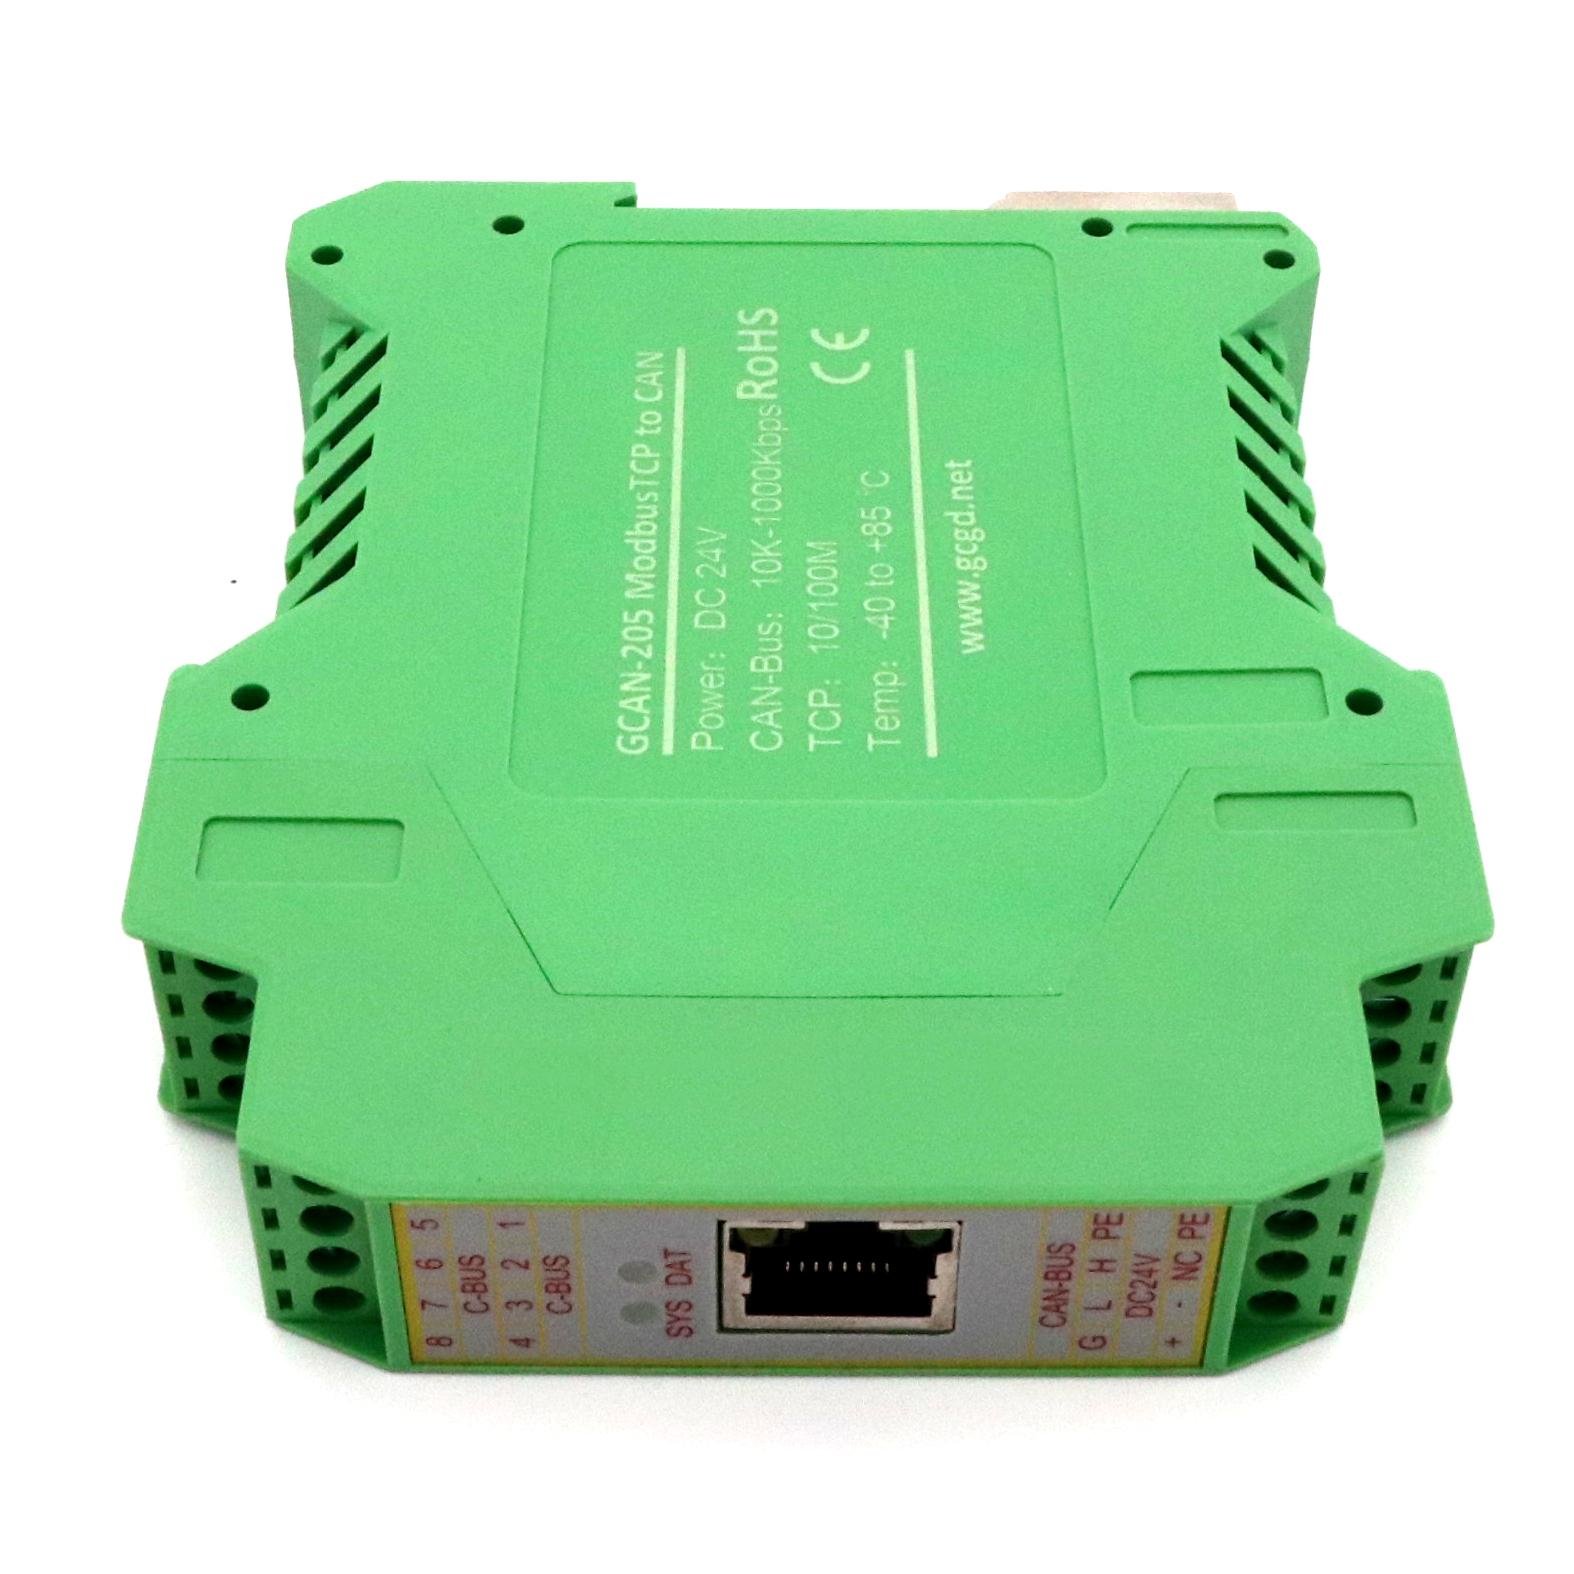 GCAN-205 Modbus TCP to CAN Converter for Monitoring Industrial Field Network 4